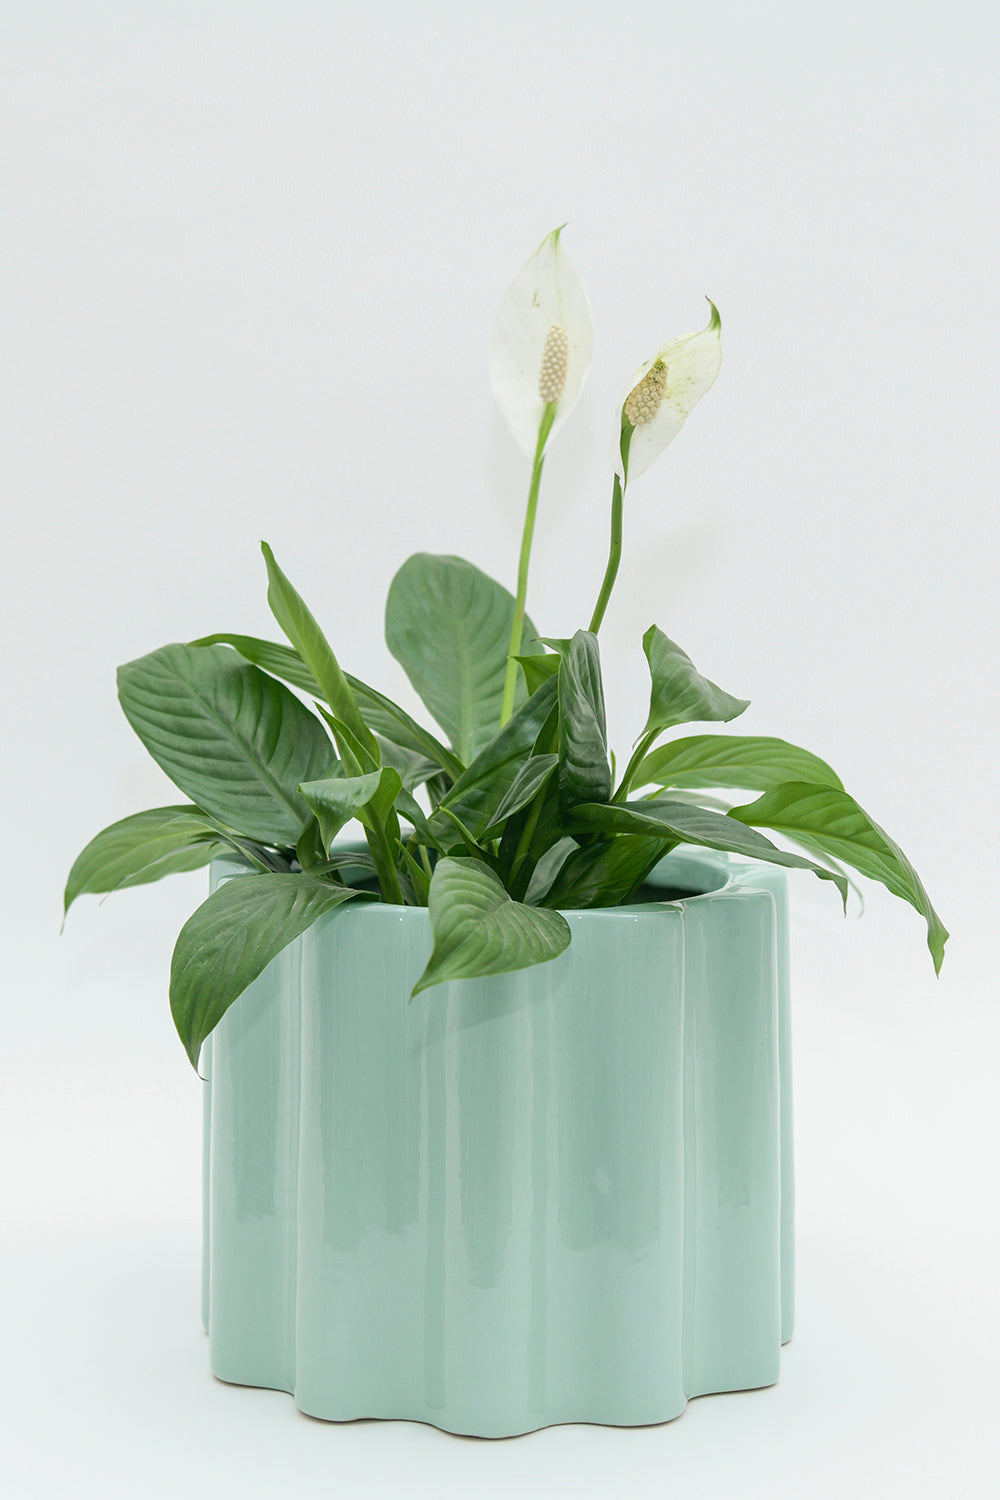 Small Size Balmy Waves Ceramic Planter in Aqua Green color with Peace Lilly plant.